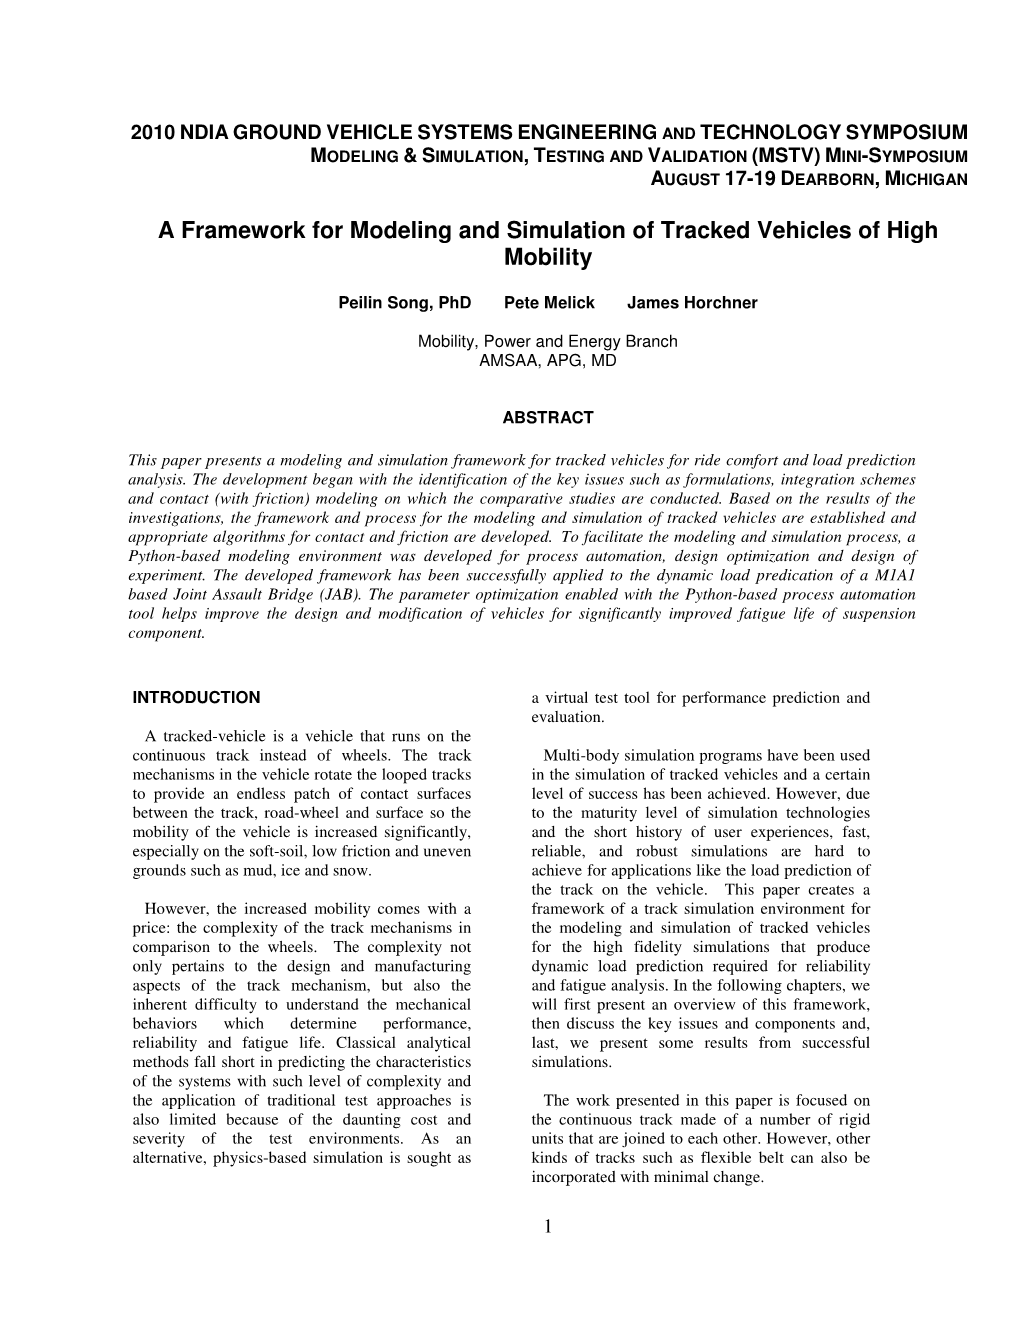 A Framework for Modeling and Simulation of Tracked Vehicles of High Mobility